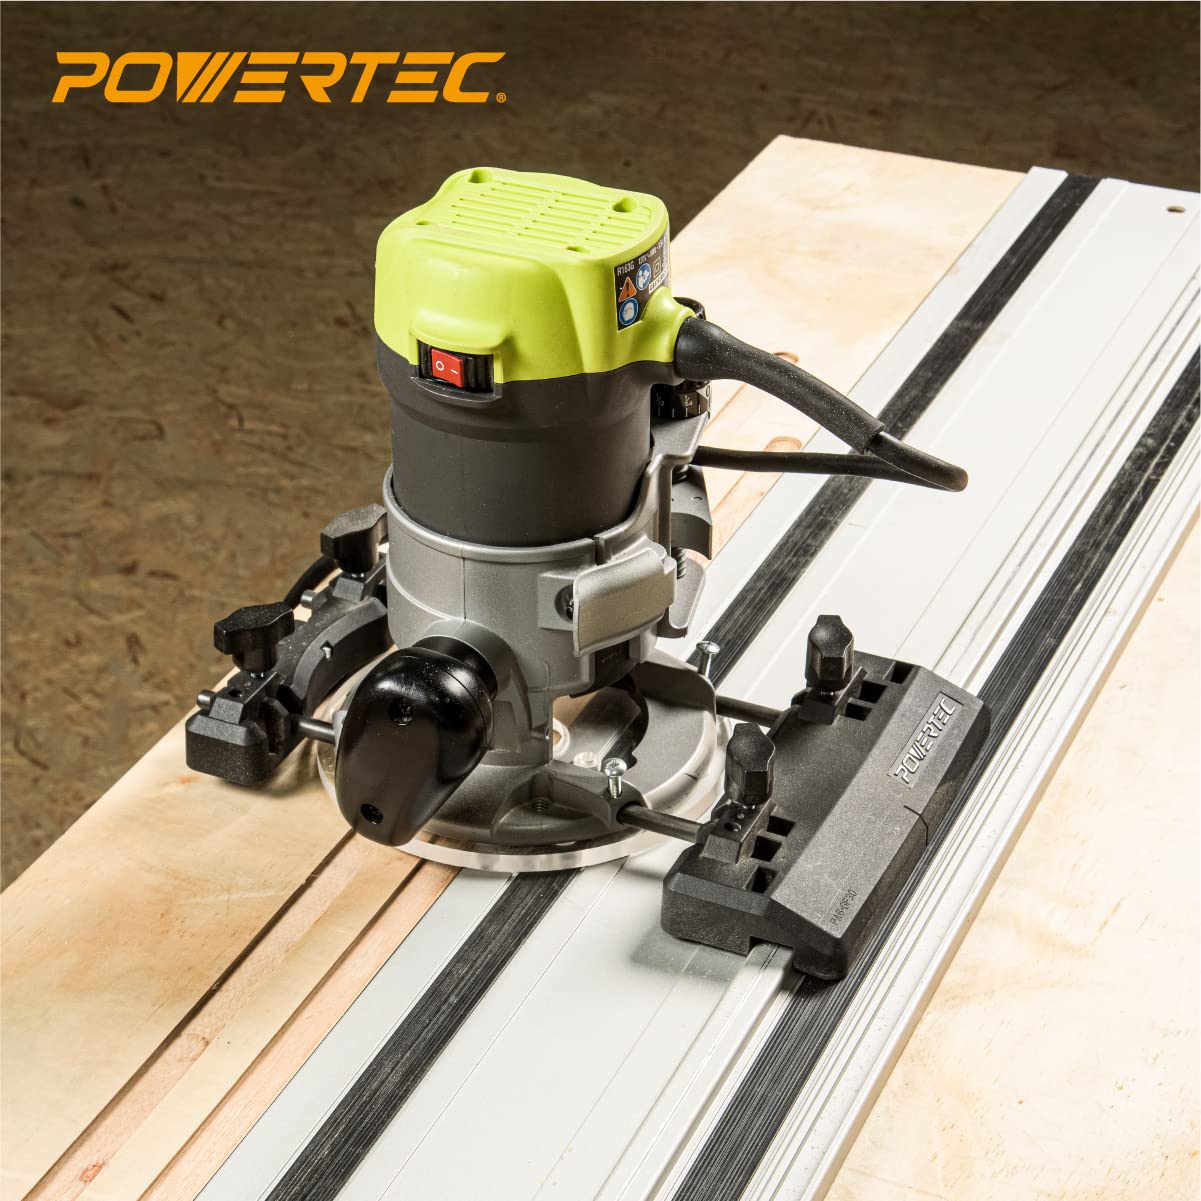 POWERTEC 71085 Router Guide Rail Adapter System for Makita/Festool Track Saw Guide Rail, Circular Saw, Compact Router & Plunge Router